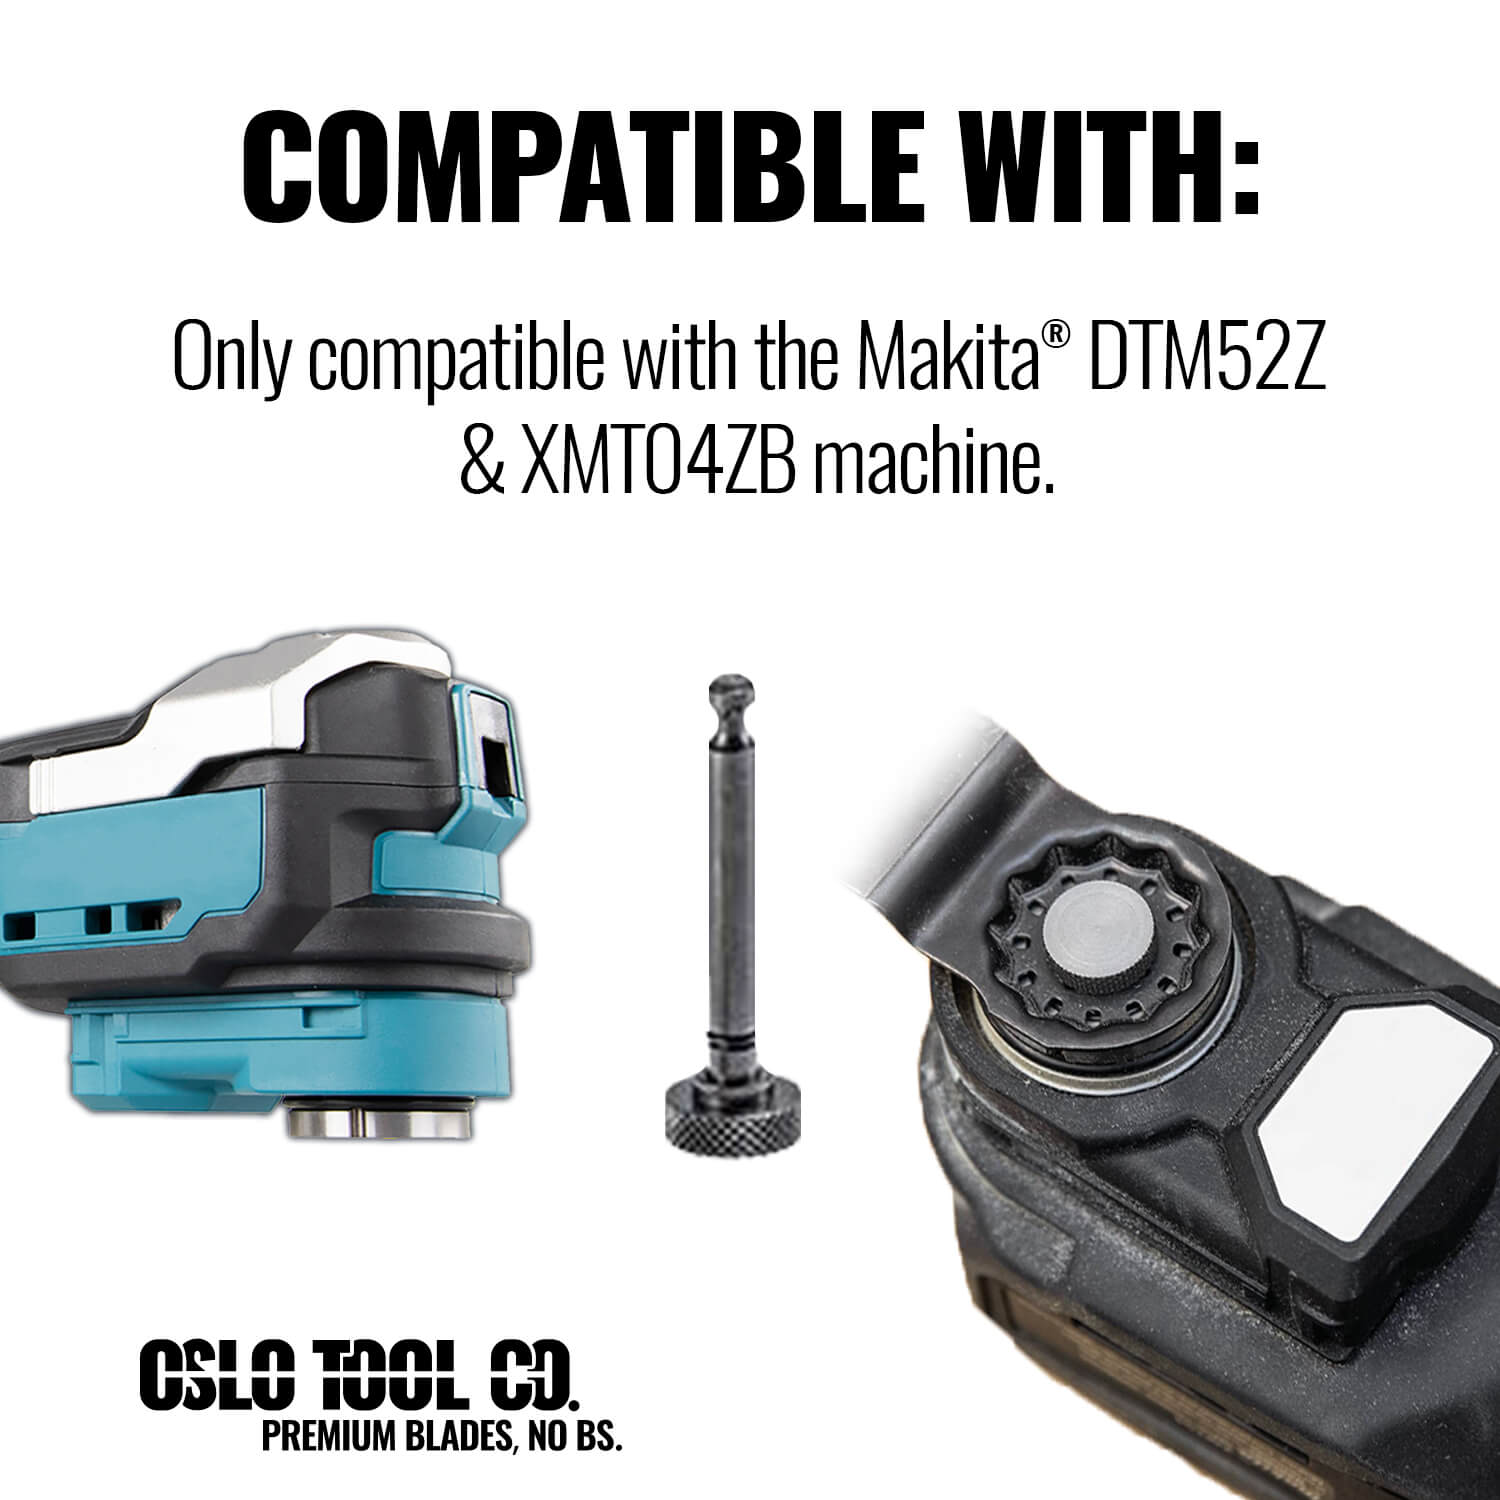 Multitool　Tool　fit　for　Adapter™　Perfect　Company　Makita™　Oslo　Int.